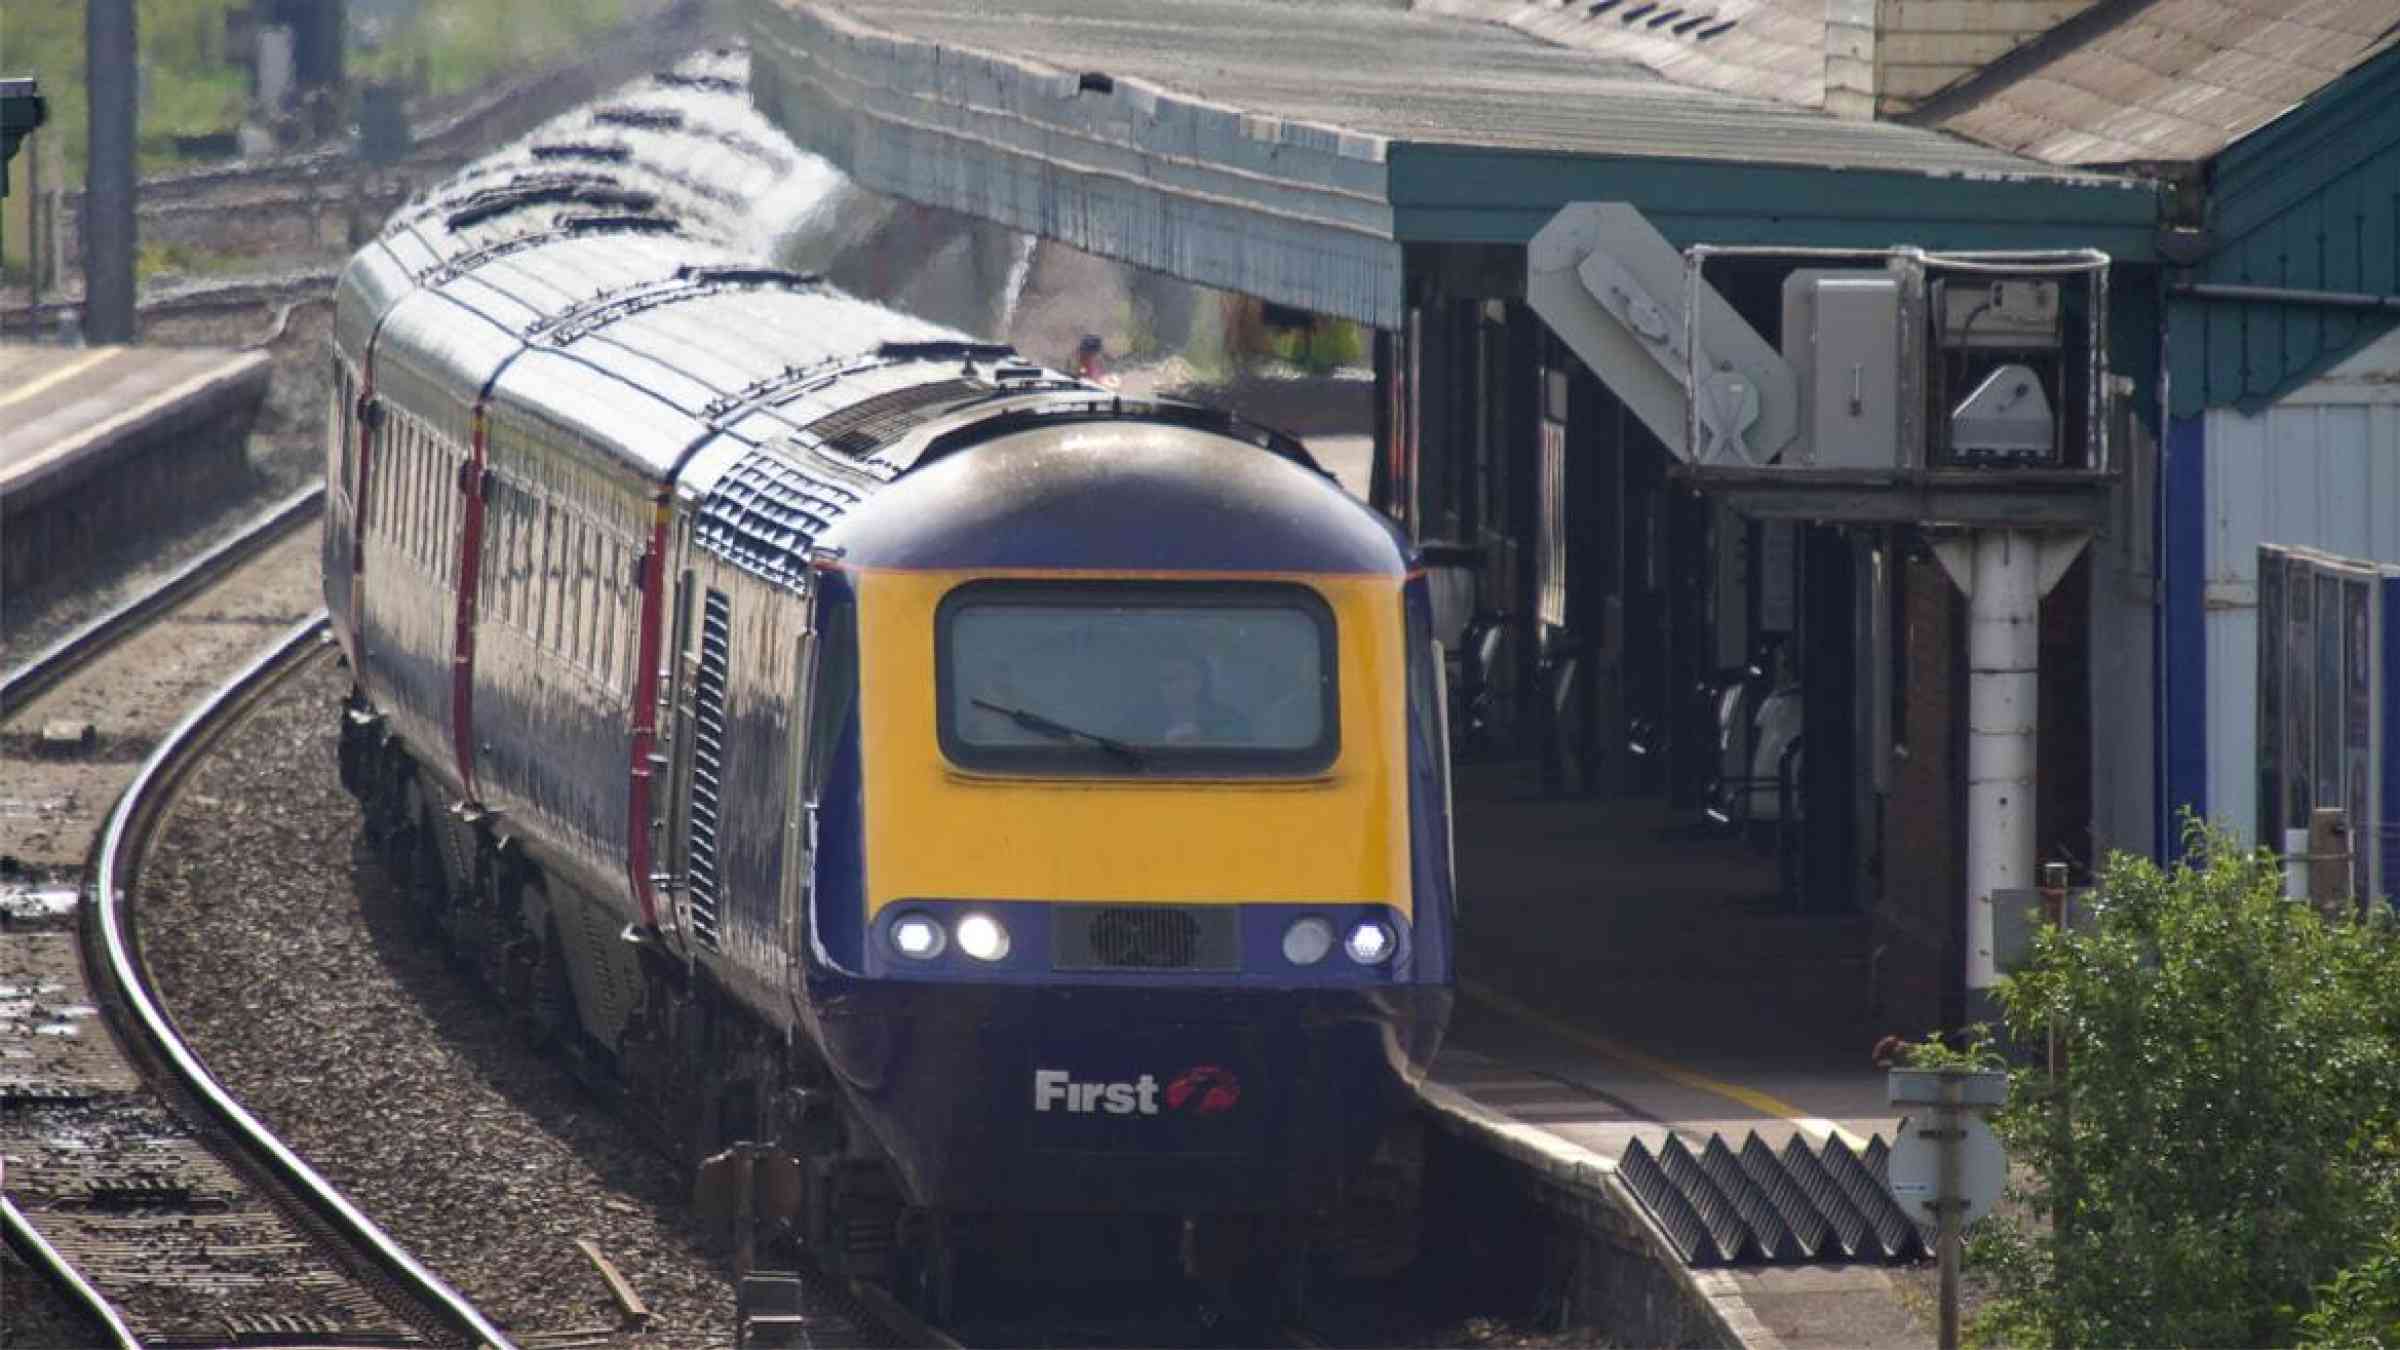 A train waits at an Oxfordshire, UK station in the daytime heat